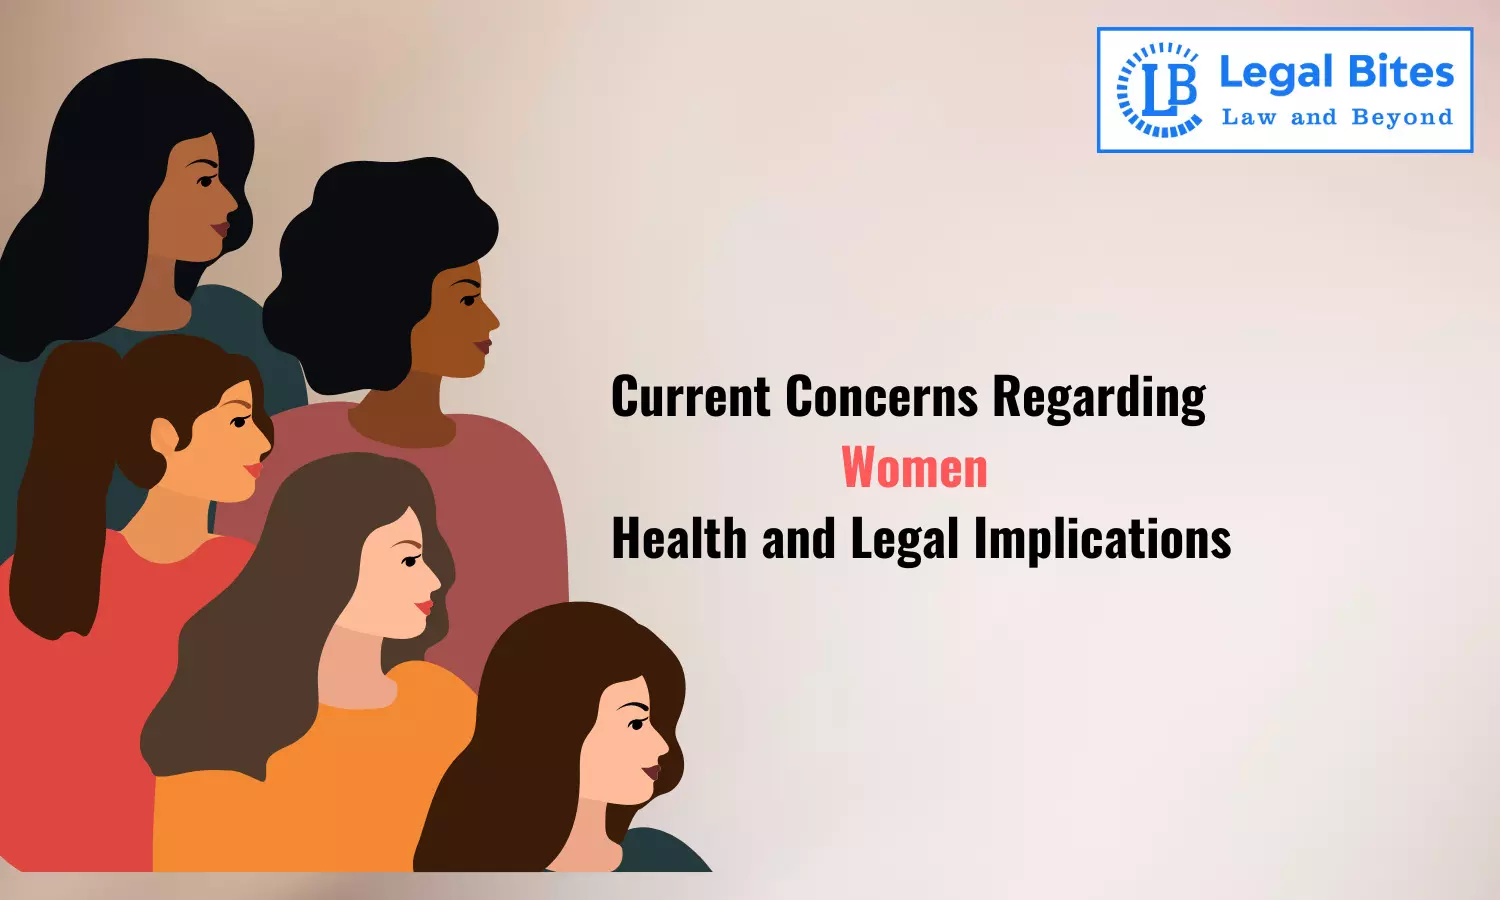 Current Concerns Regarding Women: Health and Legal Implications